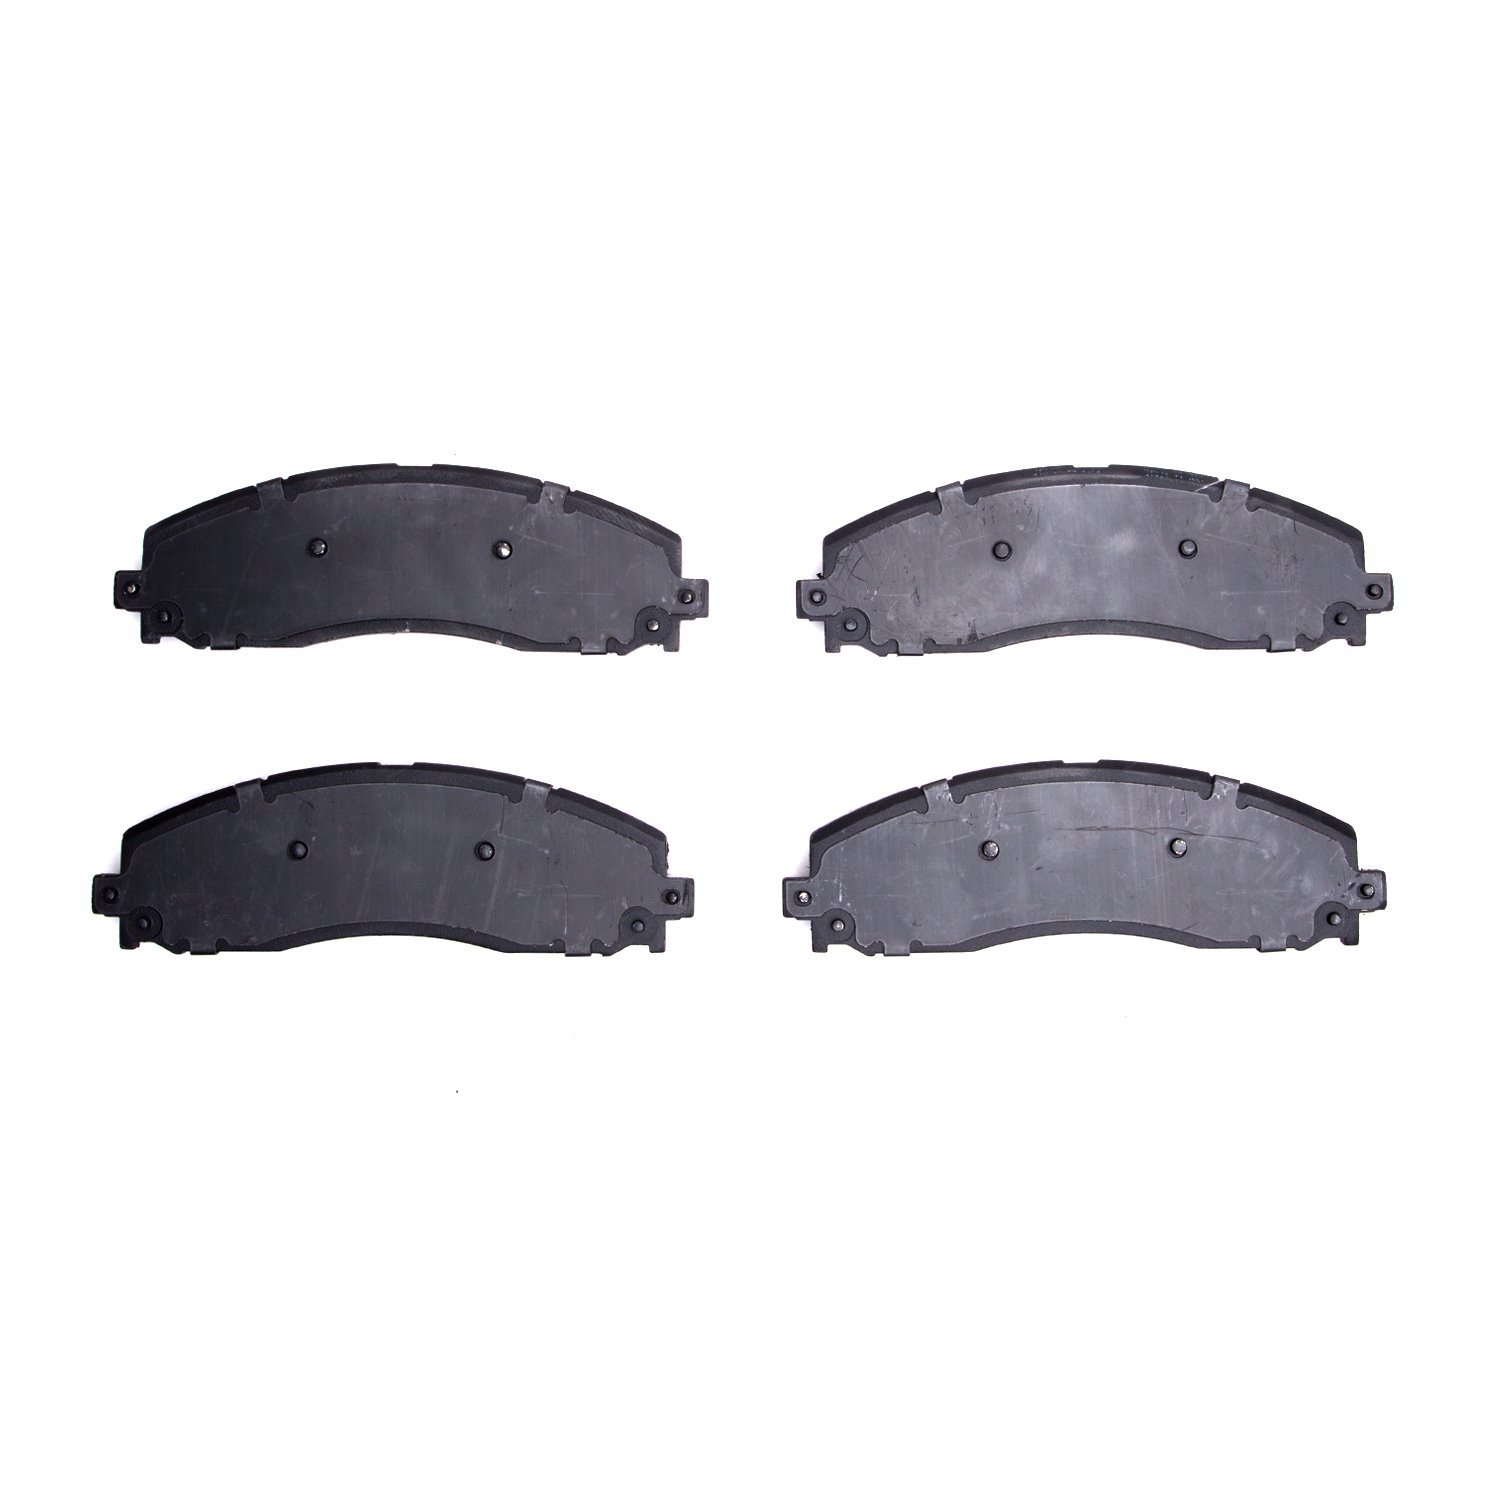 1400-1691-00 Ultimate-Duty Brake Pads Kit, Fits Select Ford/Lincoln/Mercury/Mazda, Position: Rear,Rr